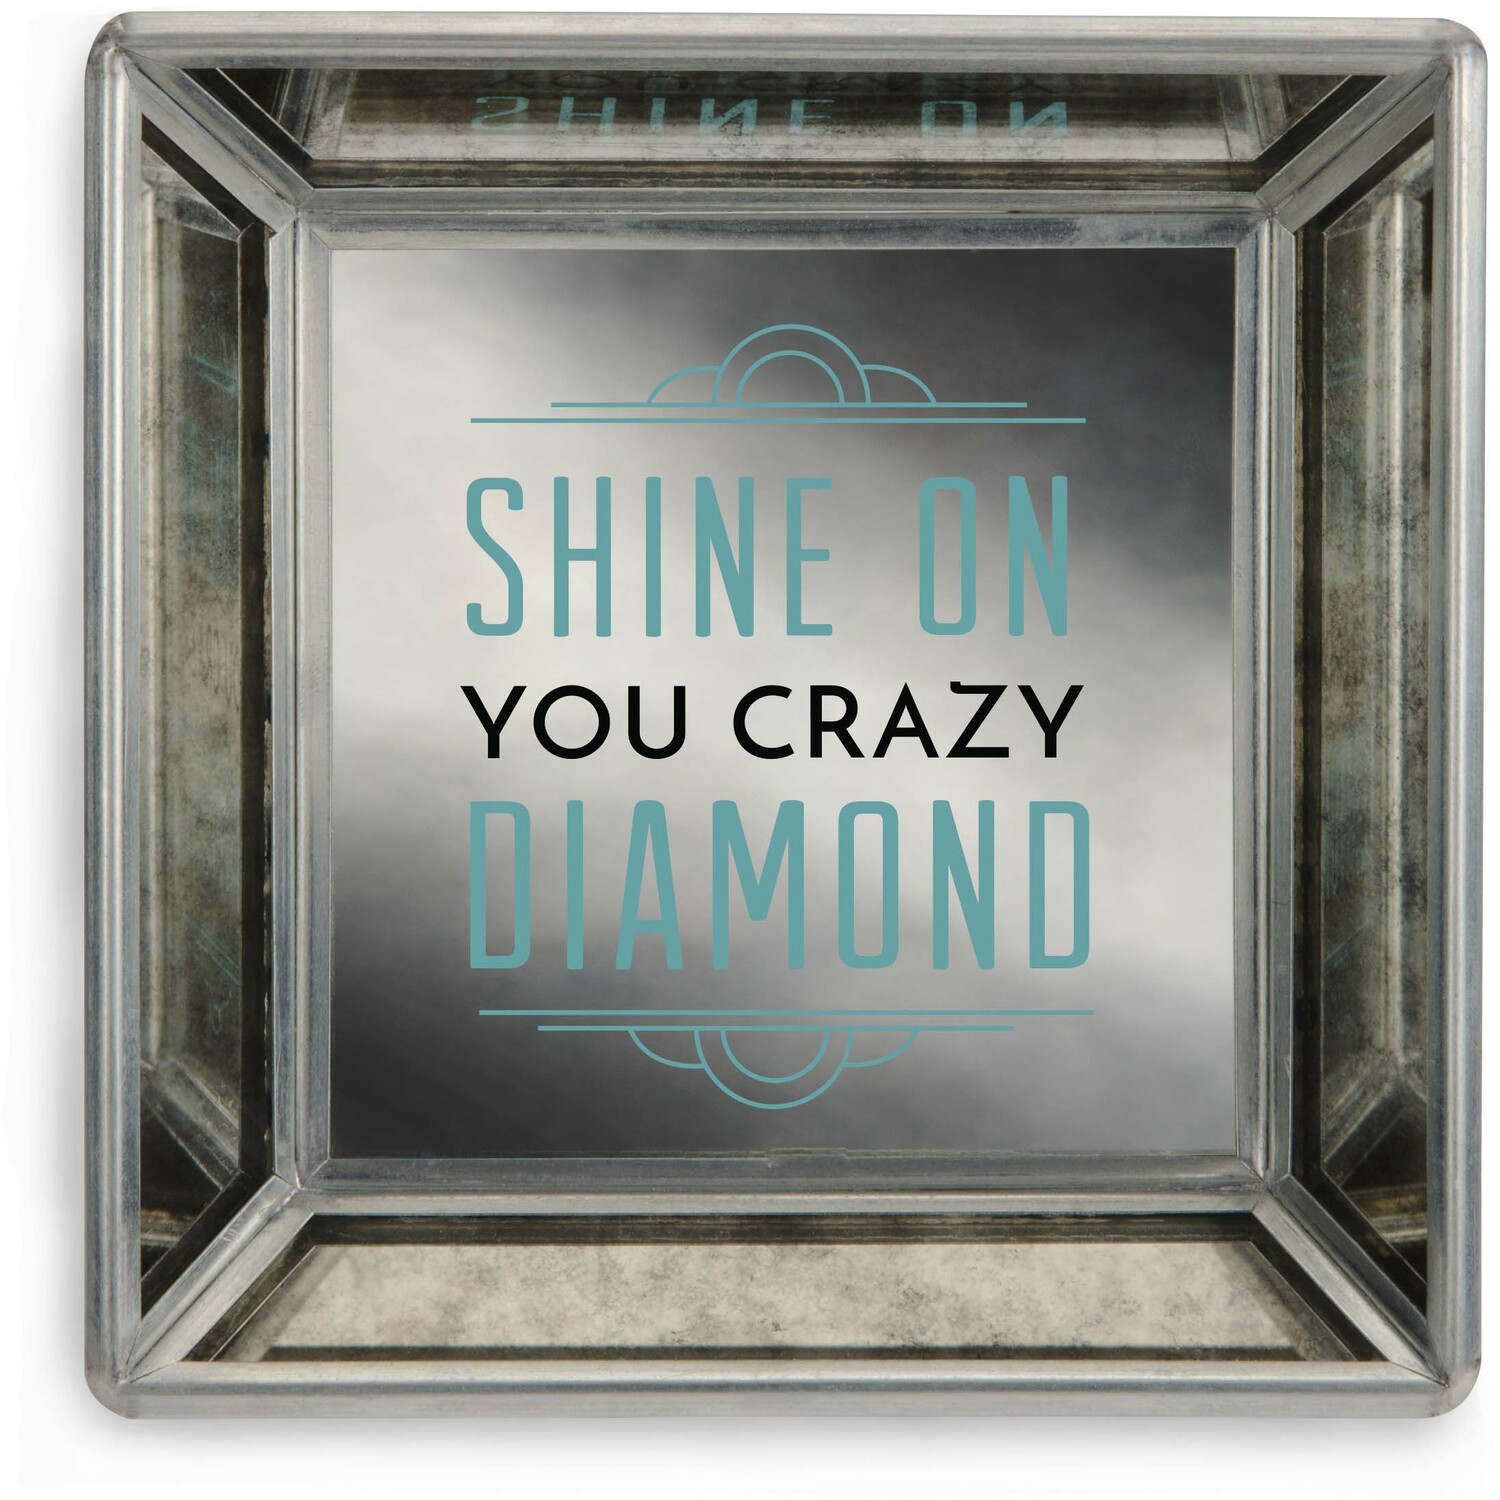 Shine On by Pretty Inappropriate - Shine On - 4" Mirrored Tray